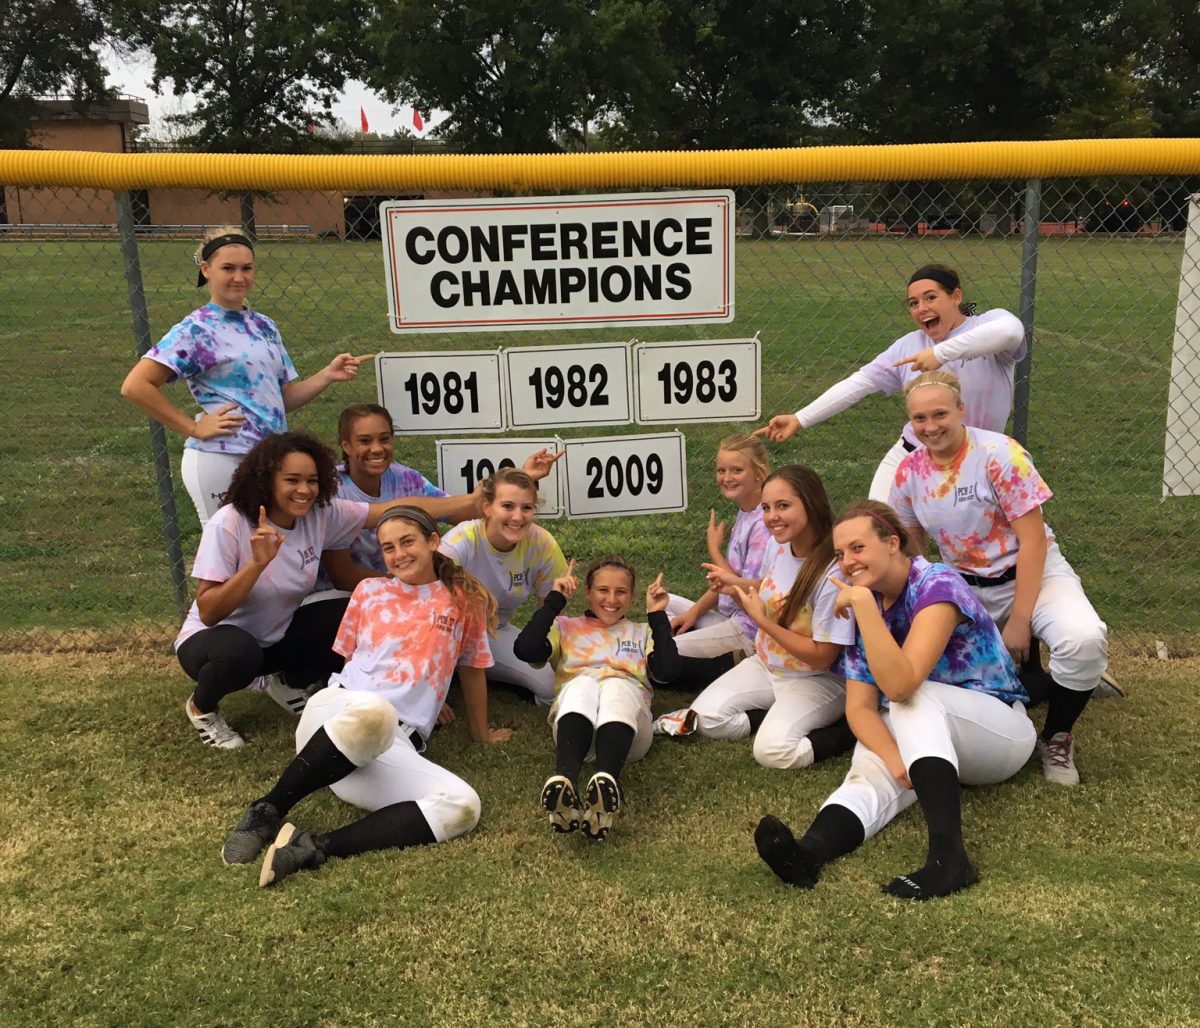 The+members+of+the+softball+team+celebrate+after+winning+the+2016+Conference+Championship+Sept.+29+on+their+home+field.+Photo+courtesy+of+Emily+West